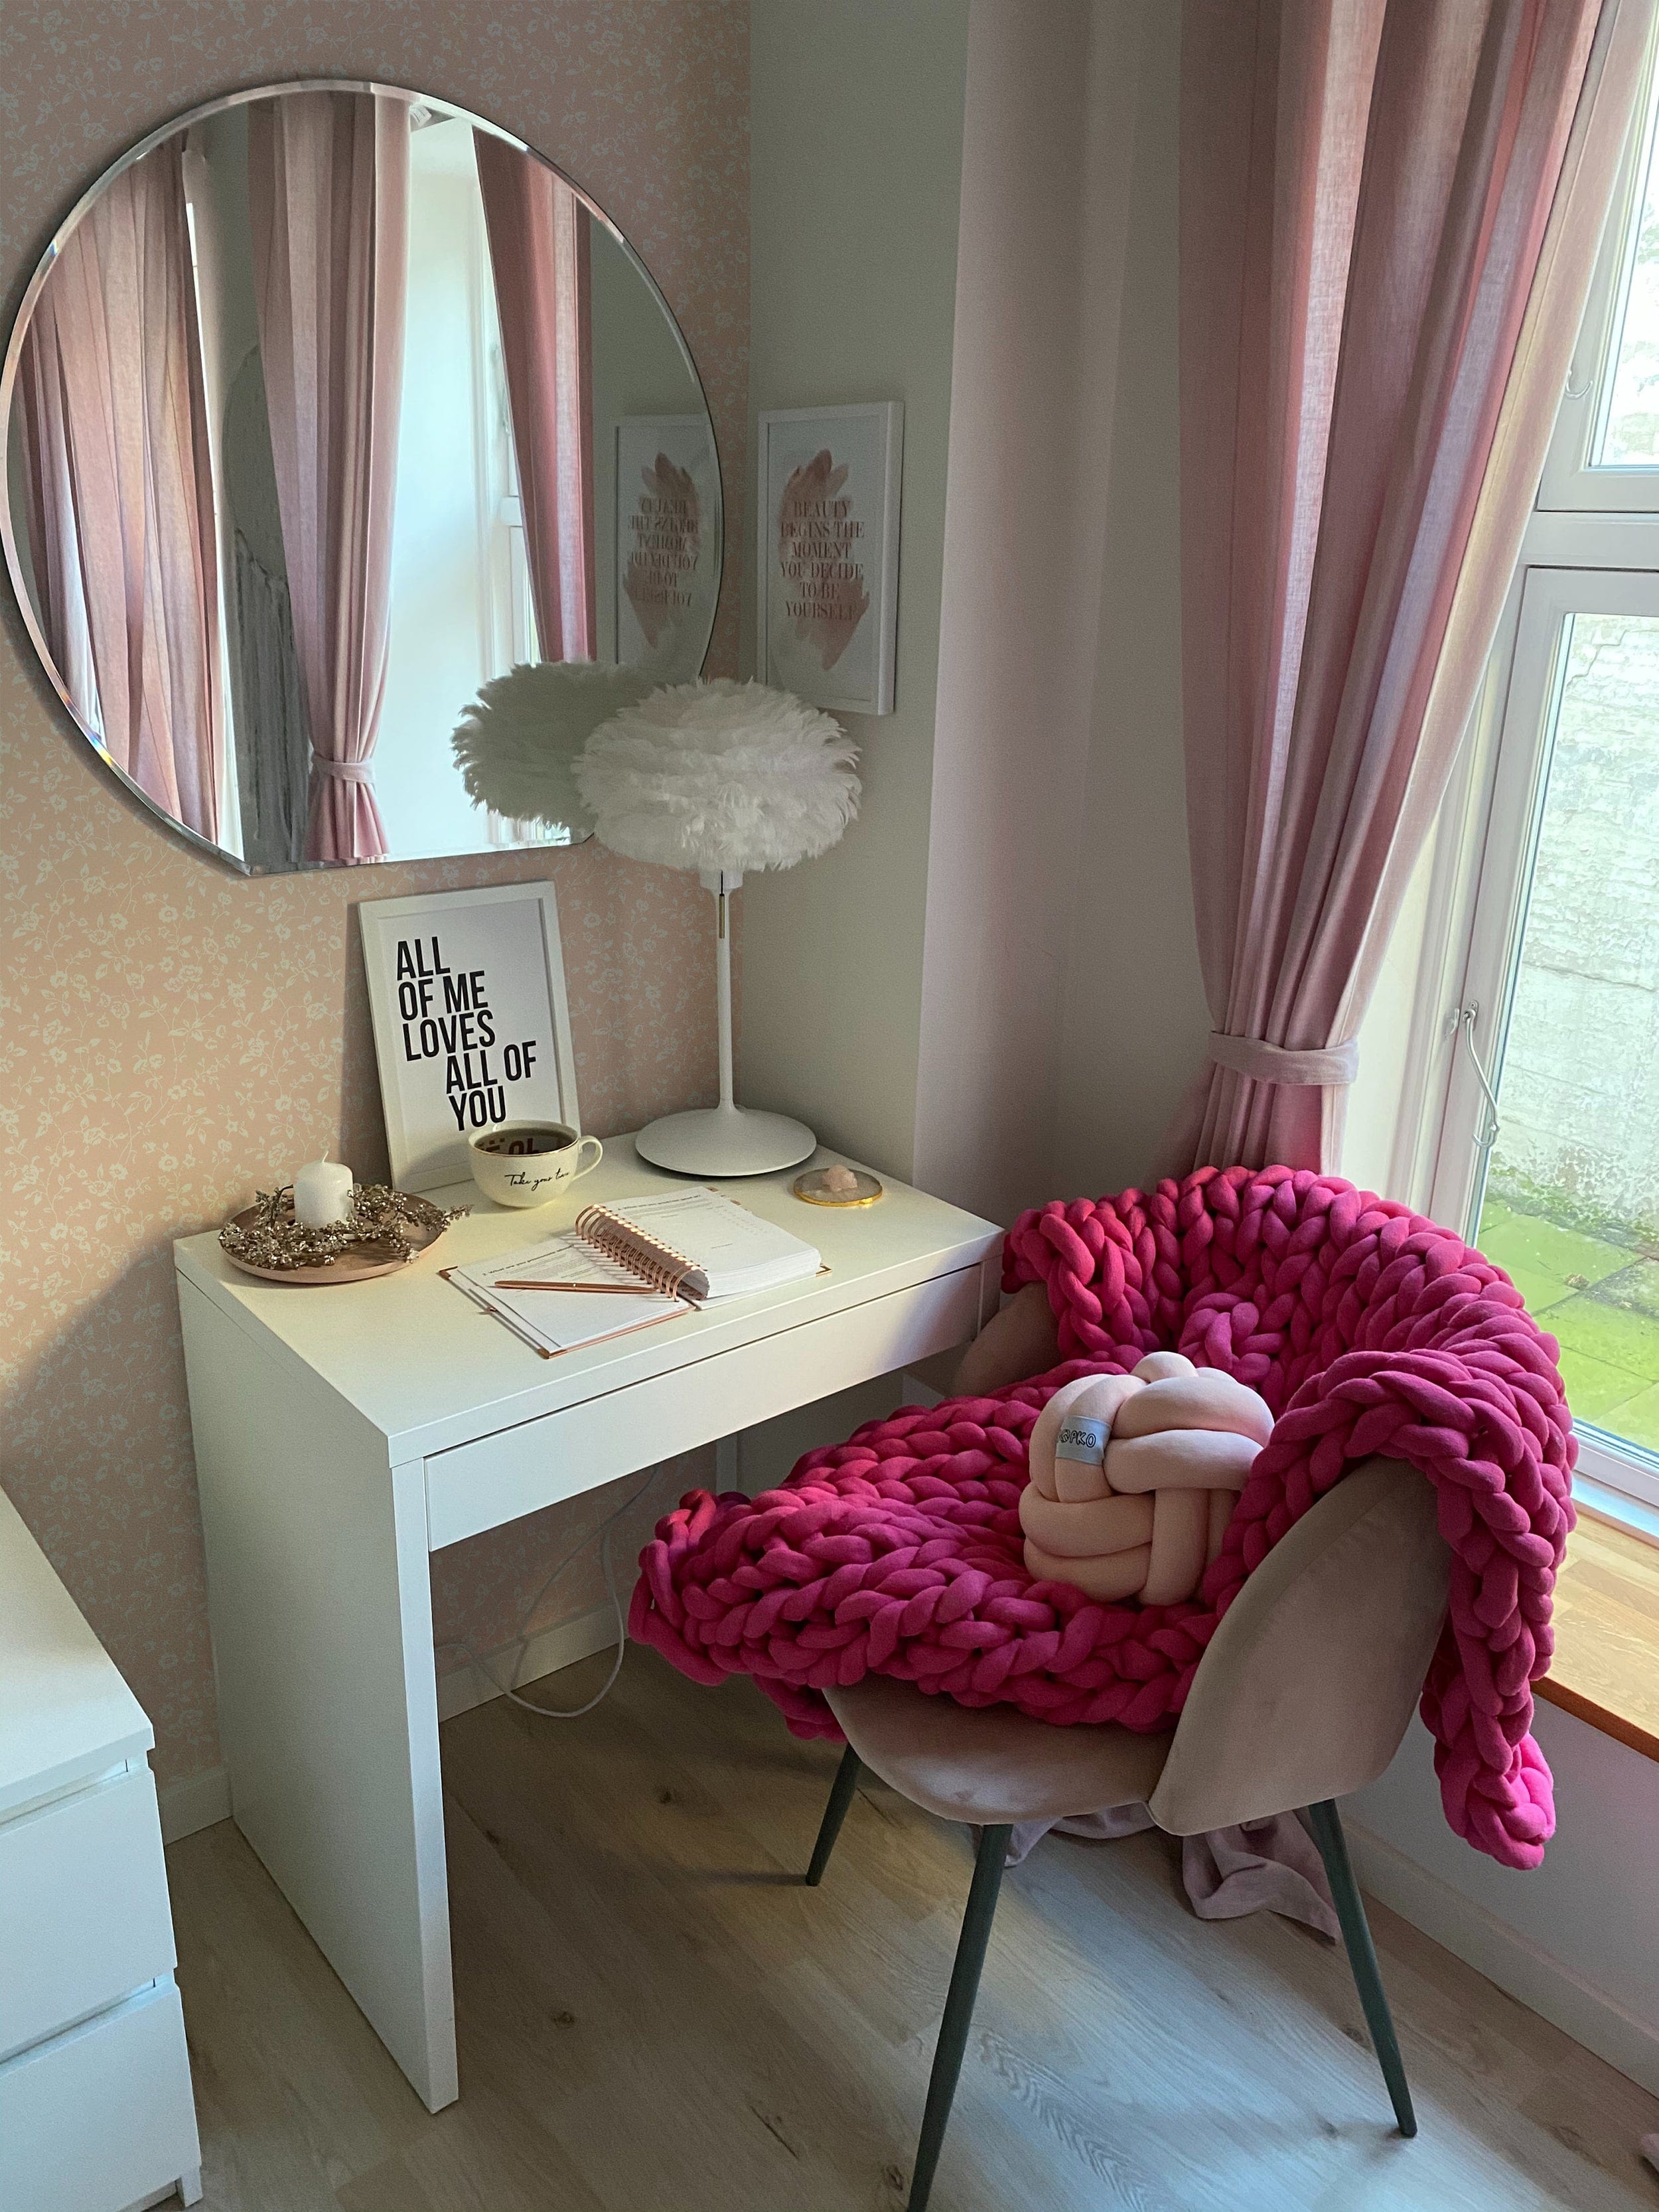 A cozy nook with a white desk and a chair draped with a chunky pink blanket. The wall is adorned with Simple Mauve Floral Wallpaper, complementing the pink curtains and creating a warm, feminine atmosphere. A round mirror and inspirational quotes complete the look.